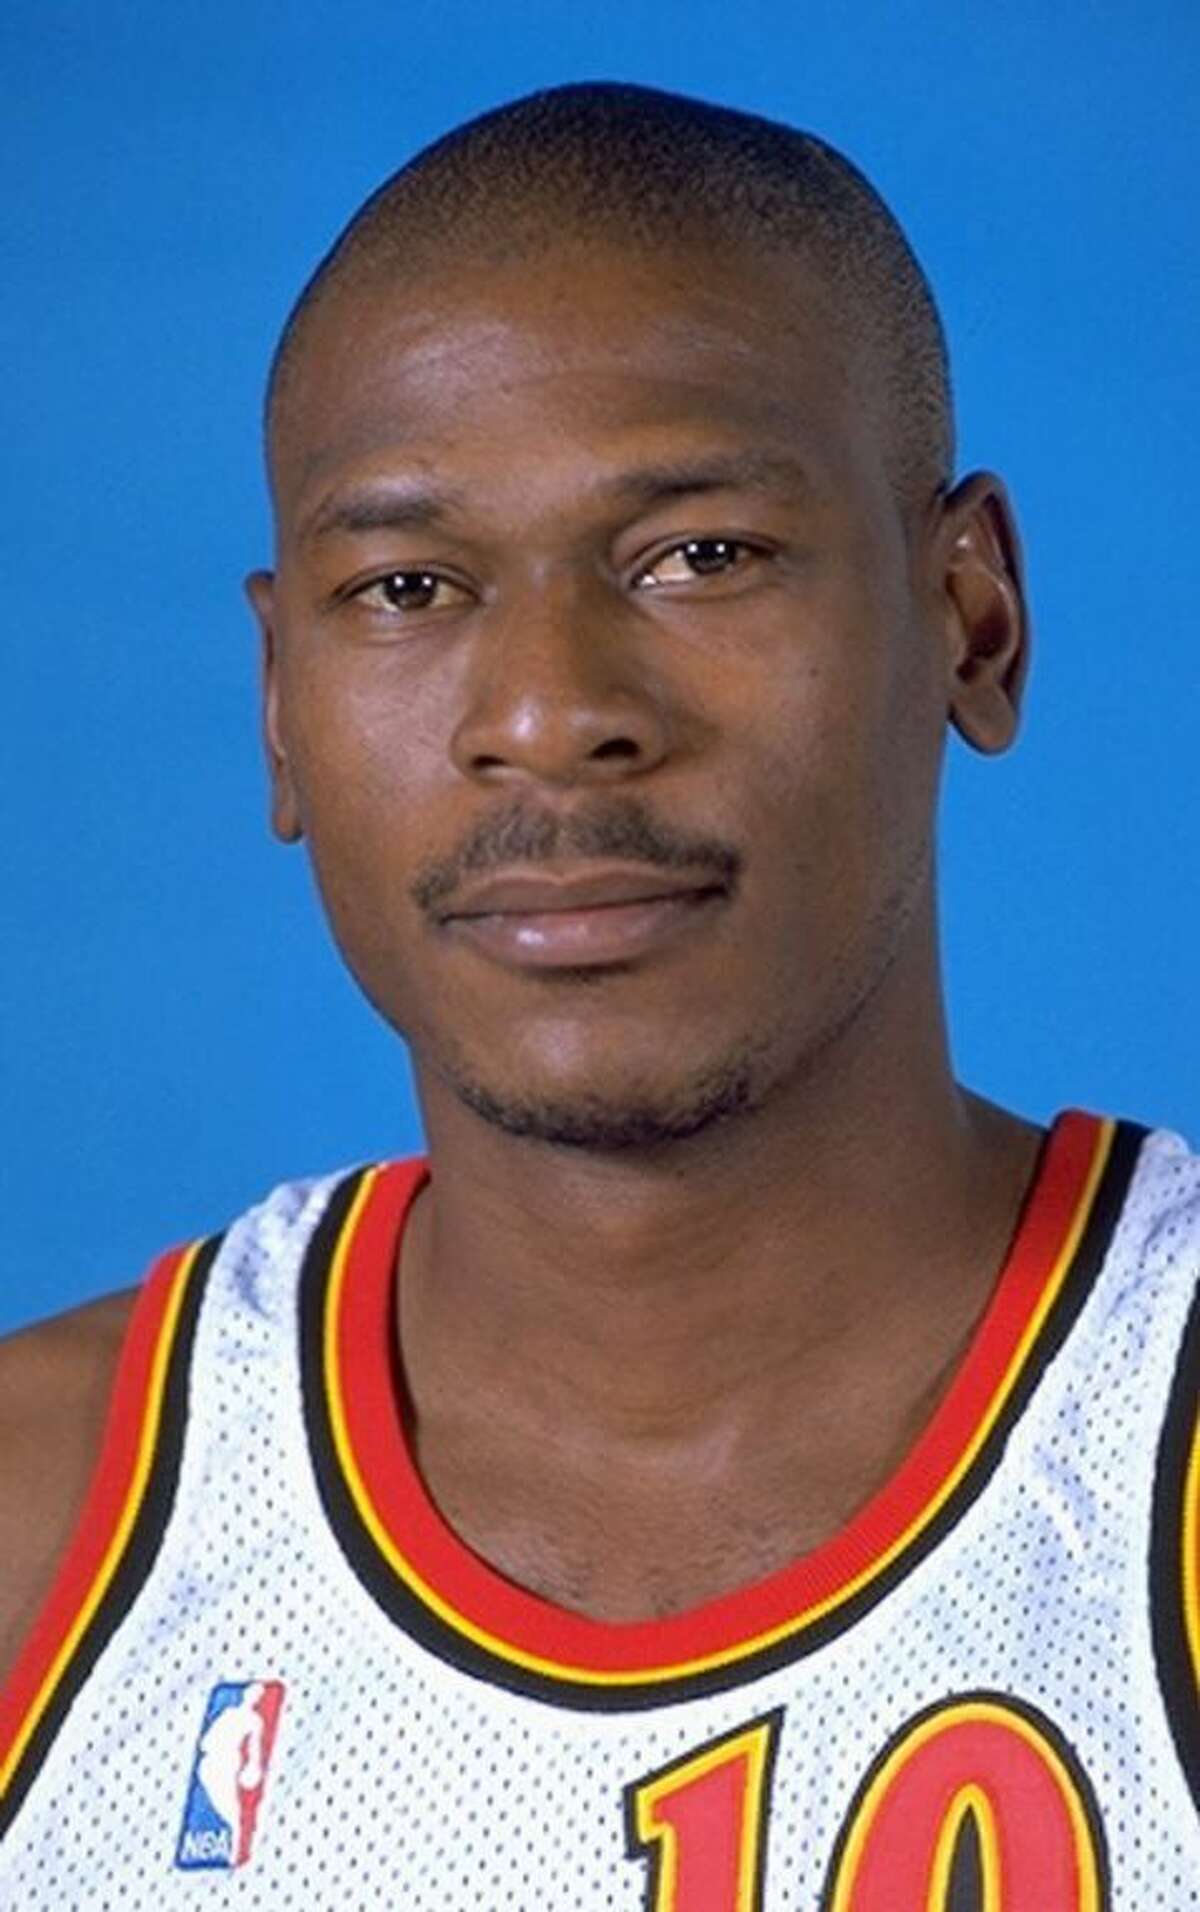 BASKETBALL: Former Chap, NBA star Blaylock in serious condition after crash